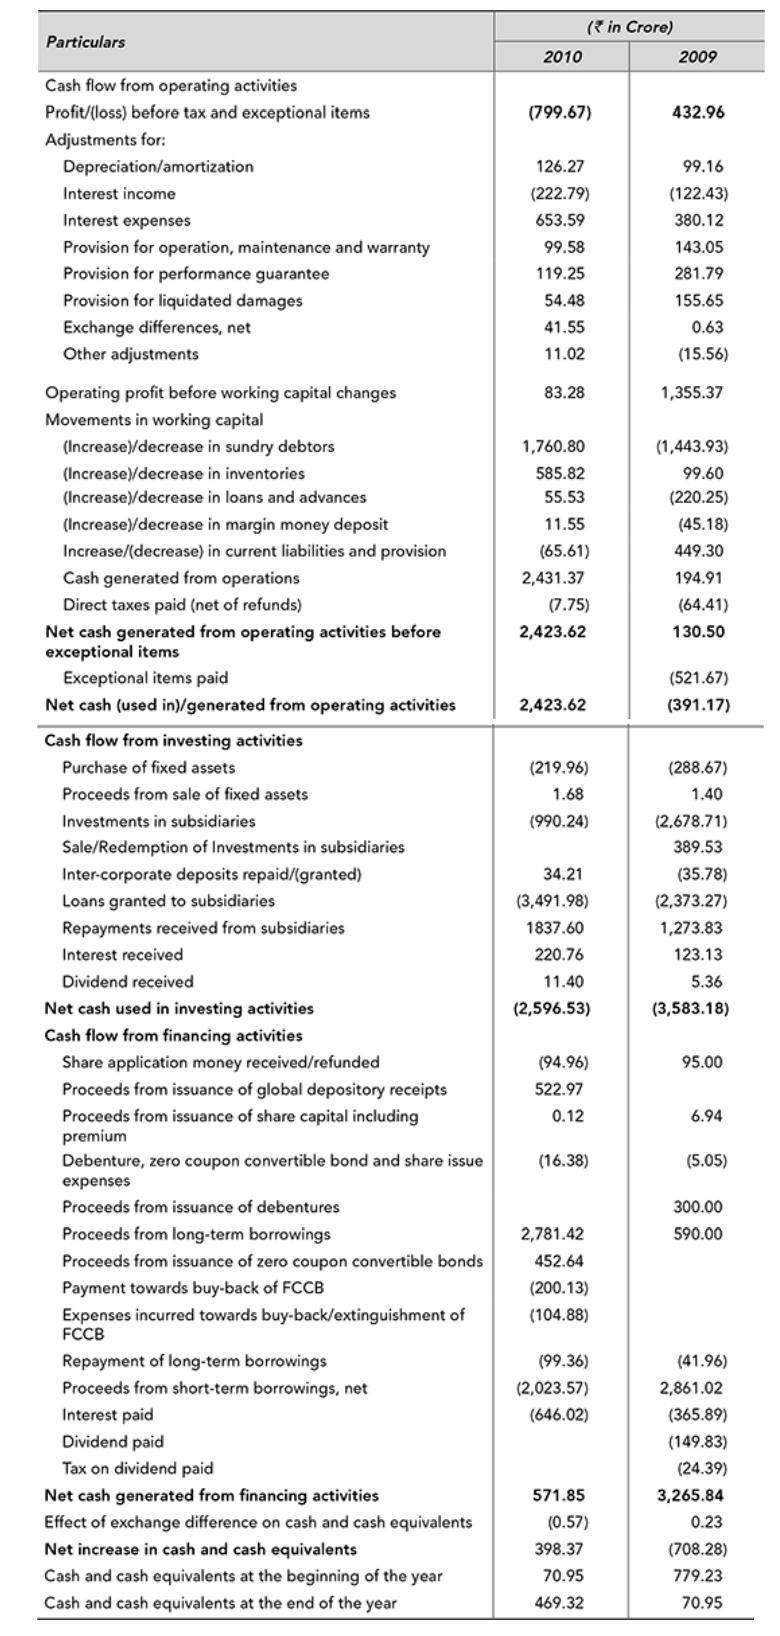 Particulars Cash flow from operating activities Profit/(loss) before tax and exceptional items Adjustments